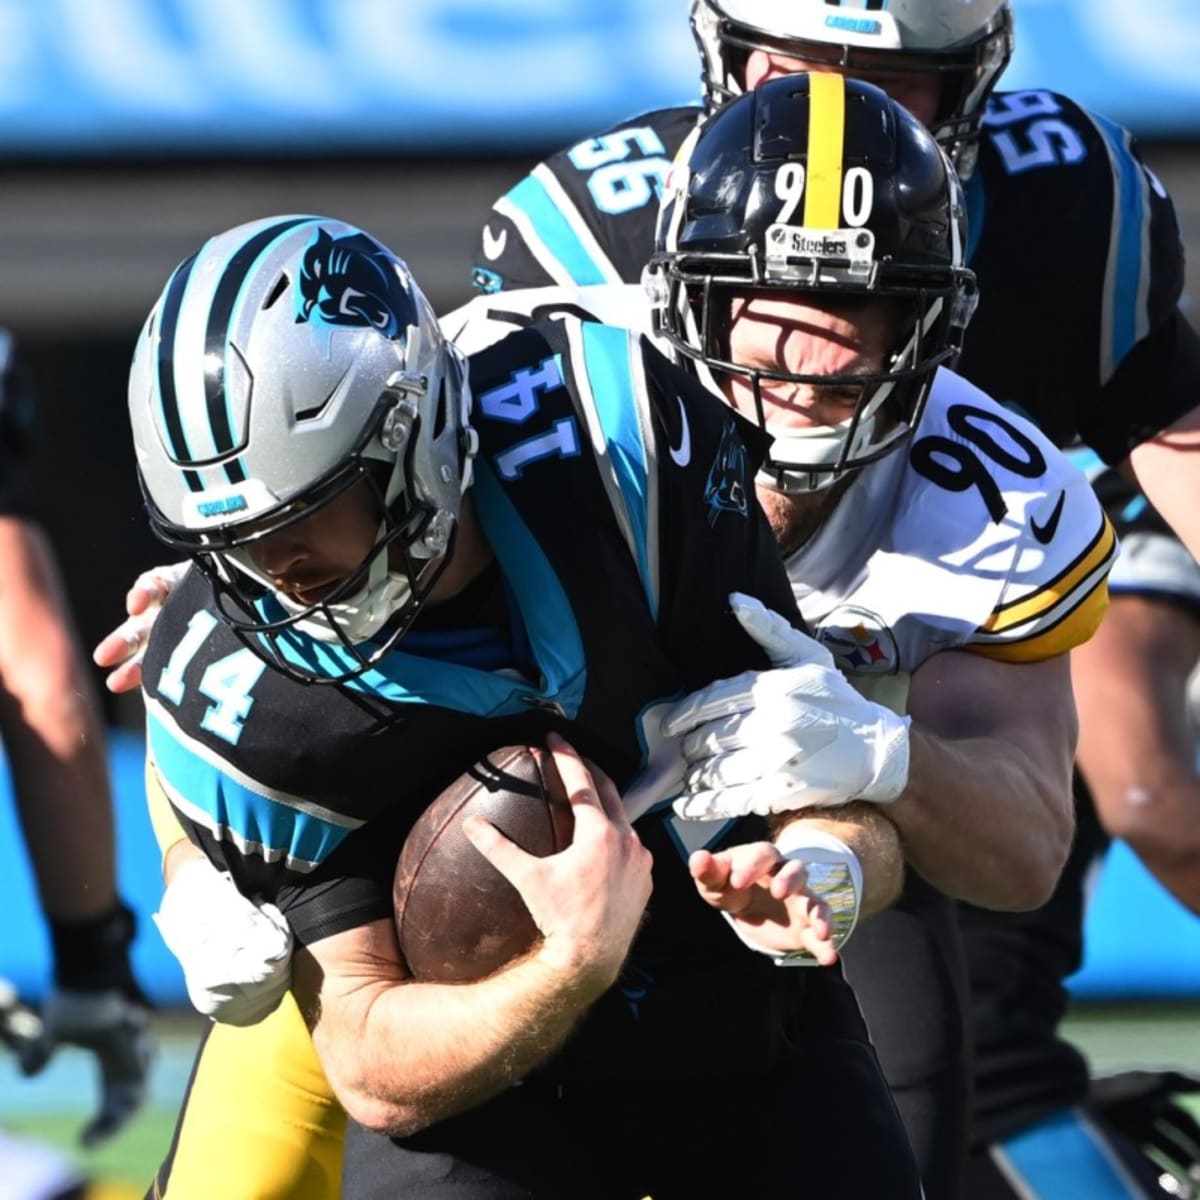 Panthers lose, 24-16, to Steelers